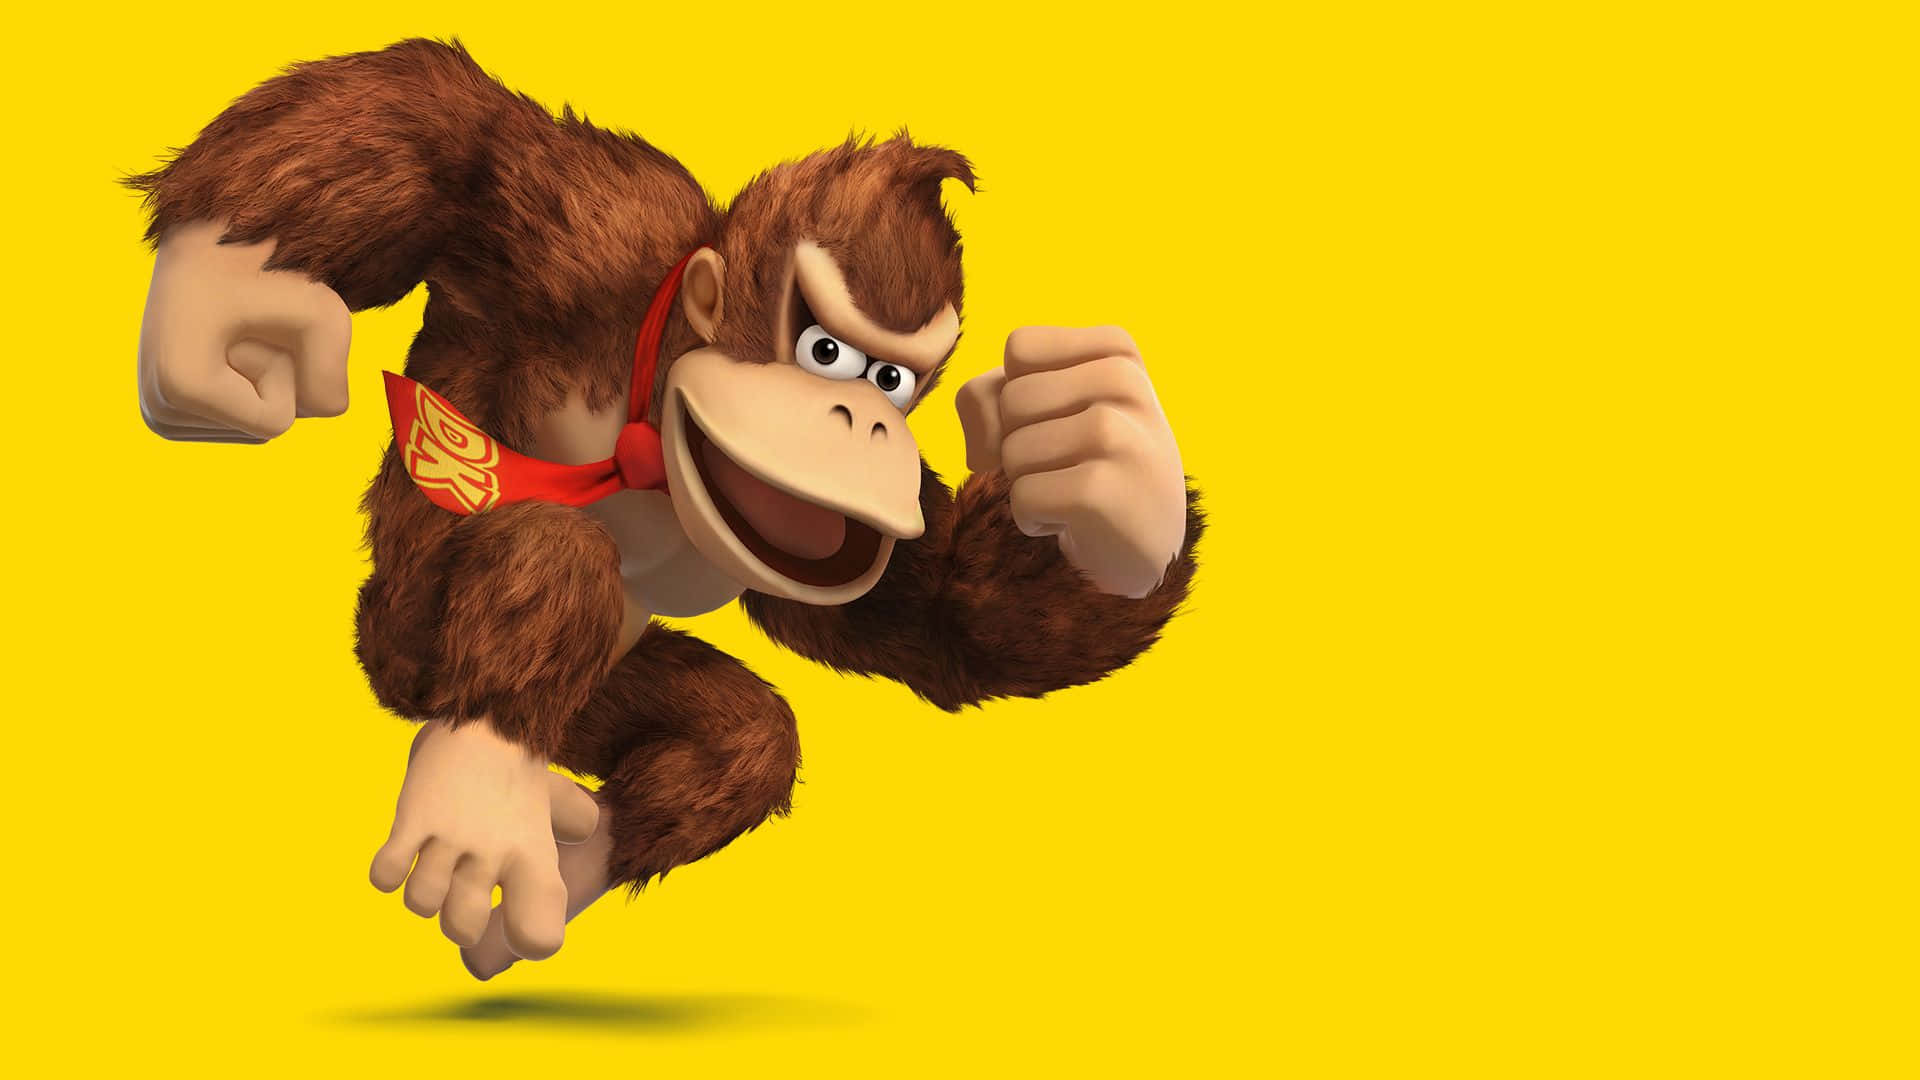 Donkey Kong In Action With A Barrel Background